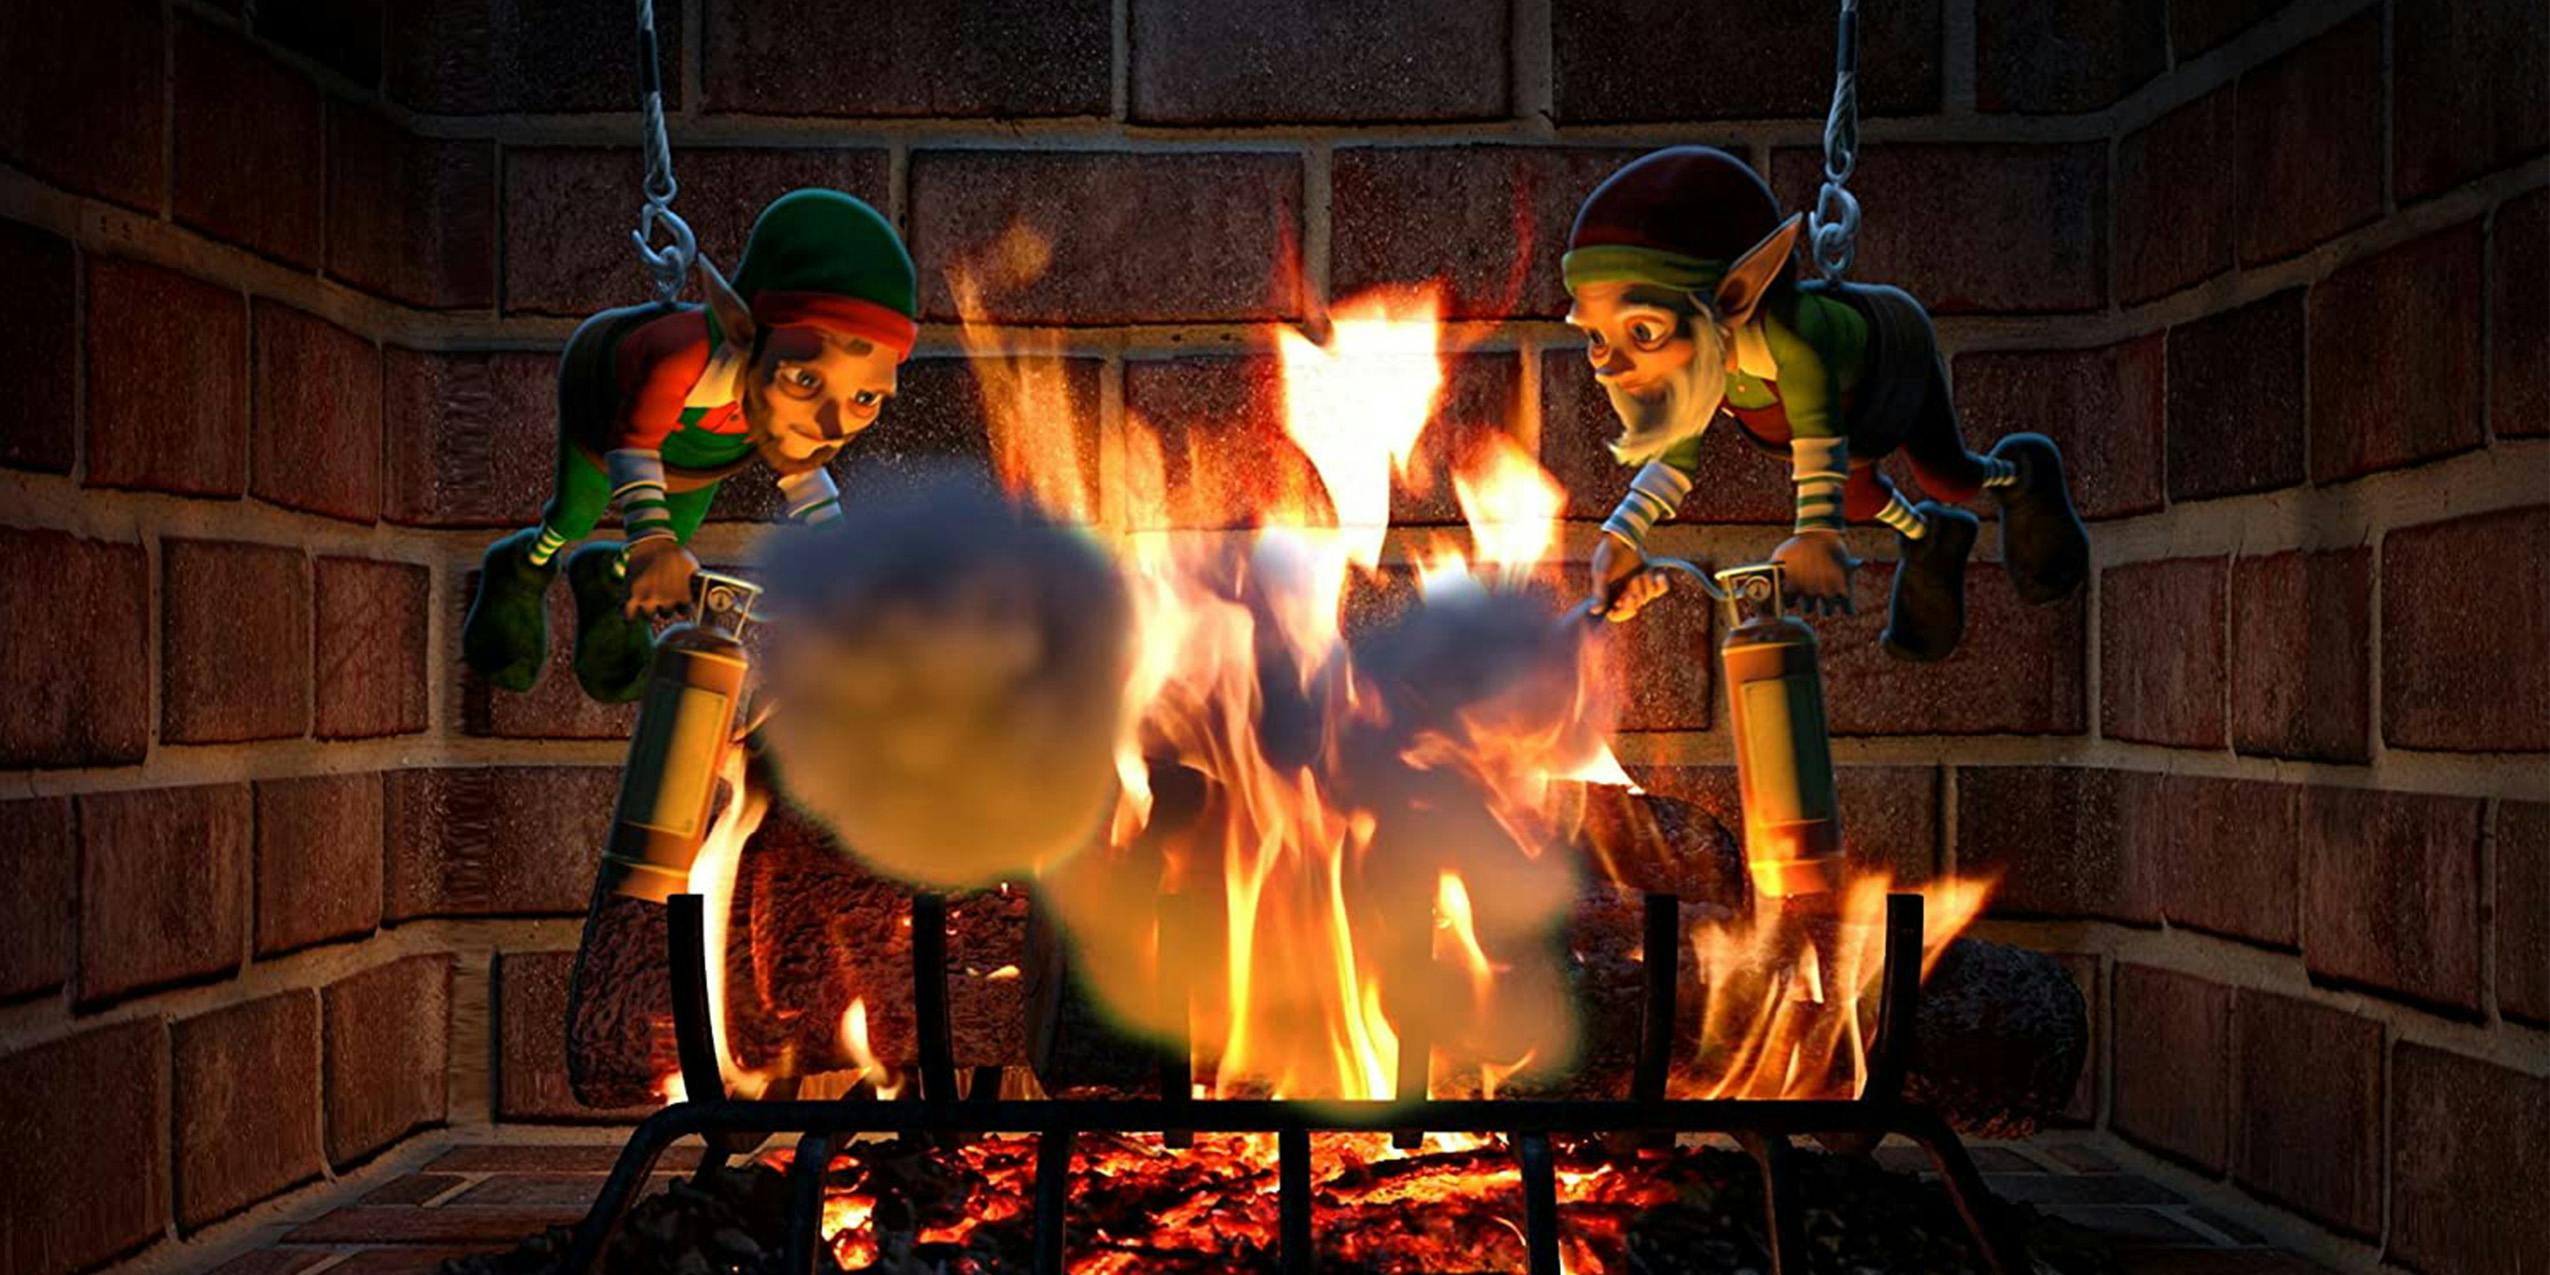 A still of goofy elves from Night Before Christmas AtmosFX DVD.